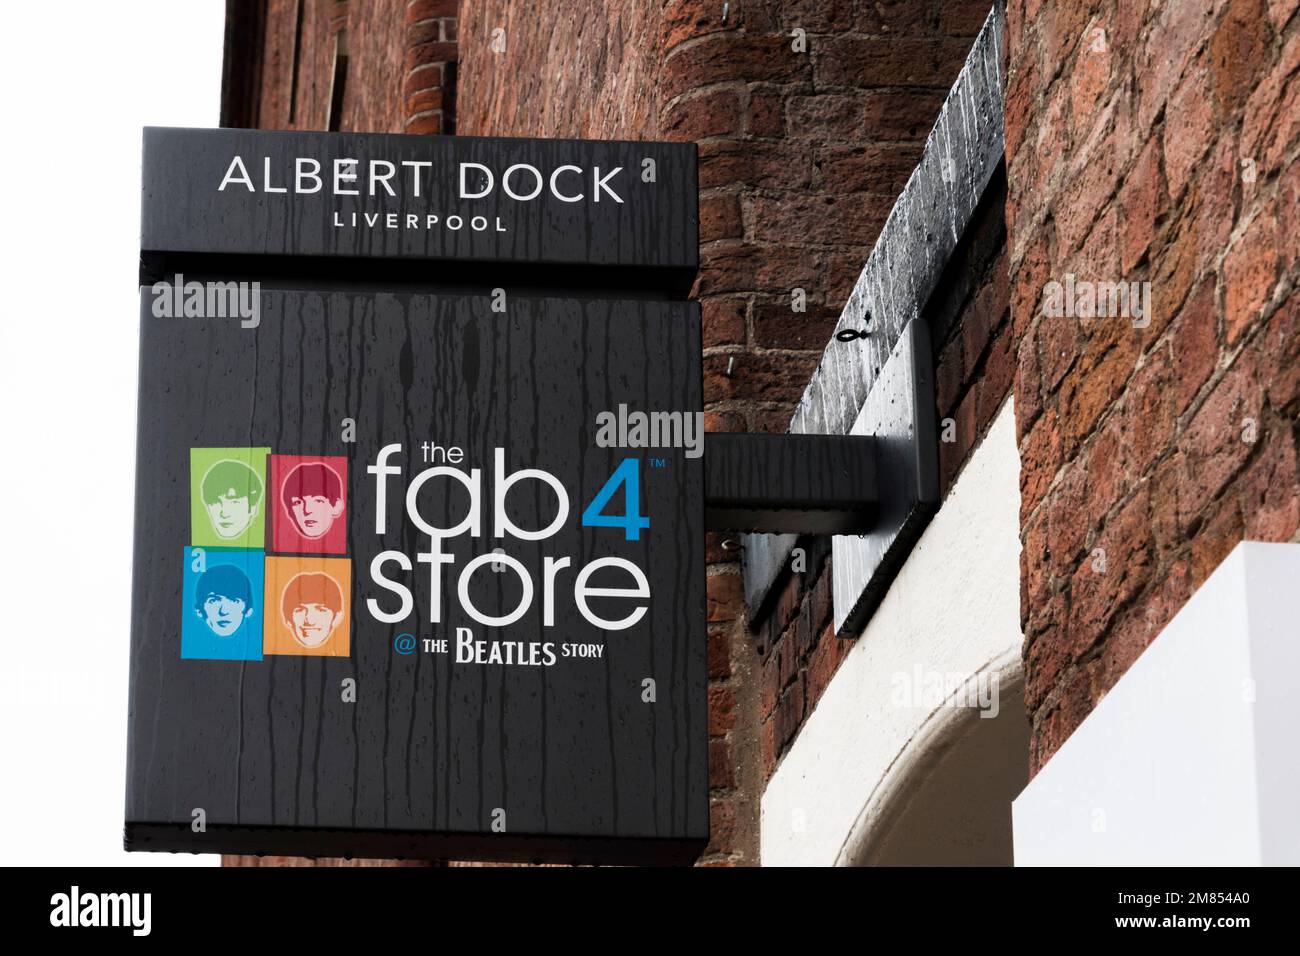 Sign for the Fab4 Store, the Beatles Story in Albert Dock, Liverpool. Stock Photo